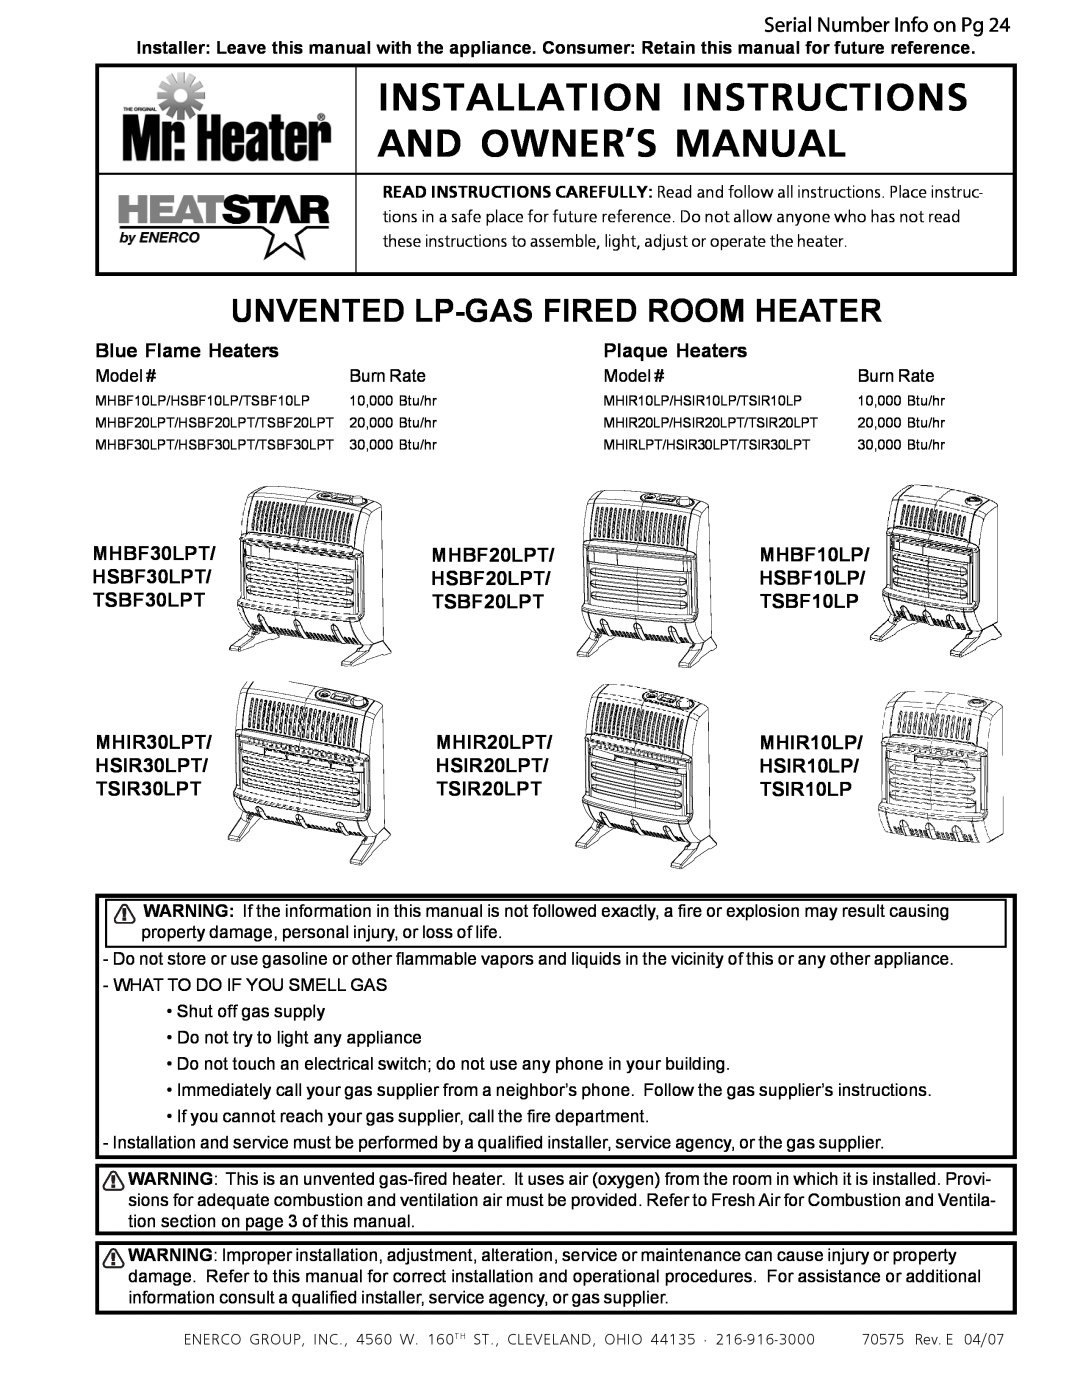 Enerco MHBF10LP, TSBF10LP, HSBF10LP installation instructions Unvented Lp-Gasfired Room Heater, Serial Number Info on Pg 